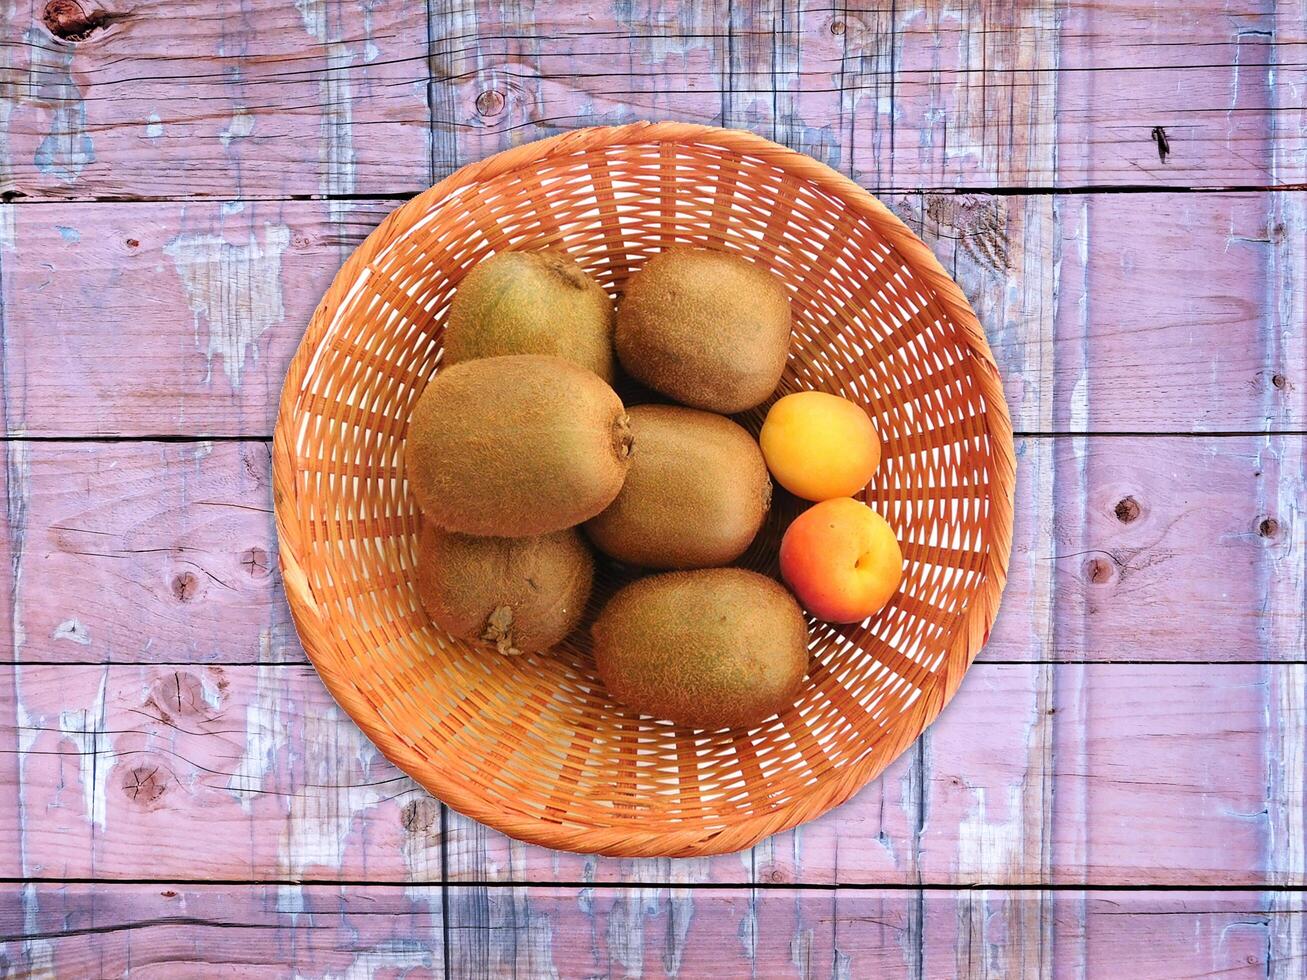 Fruit On The Wooden Background photo